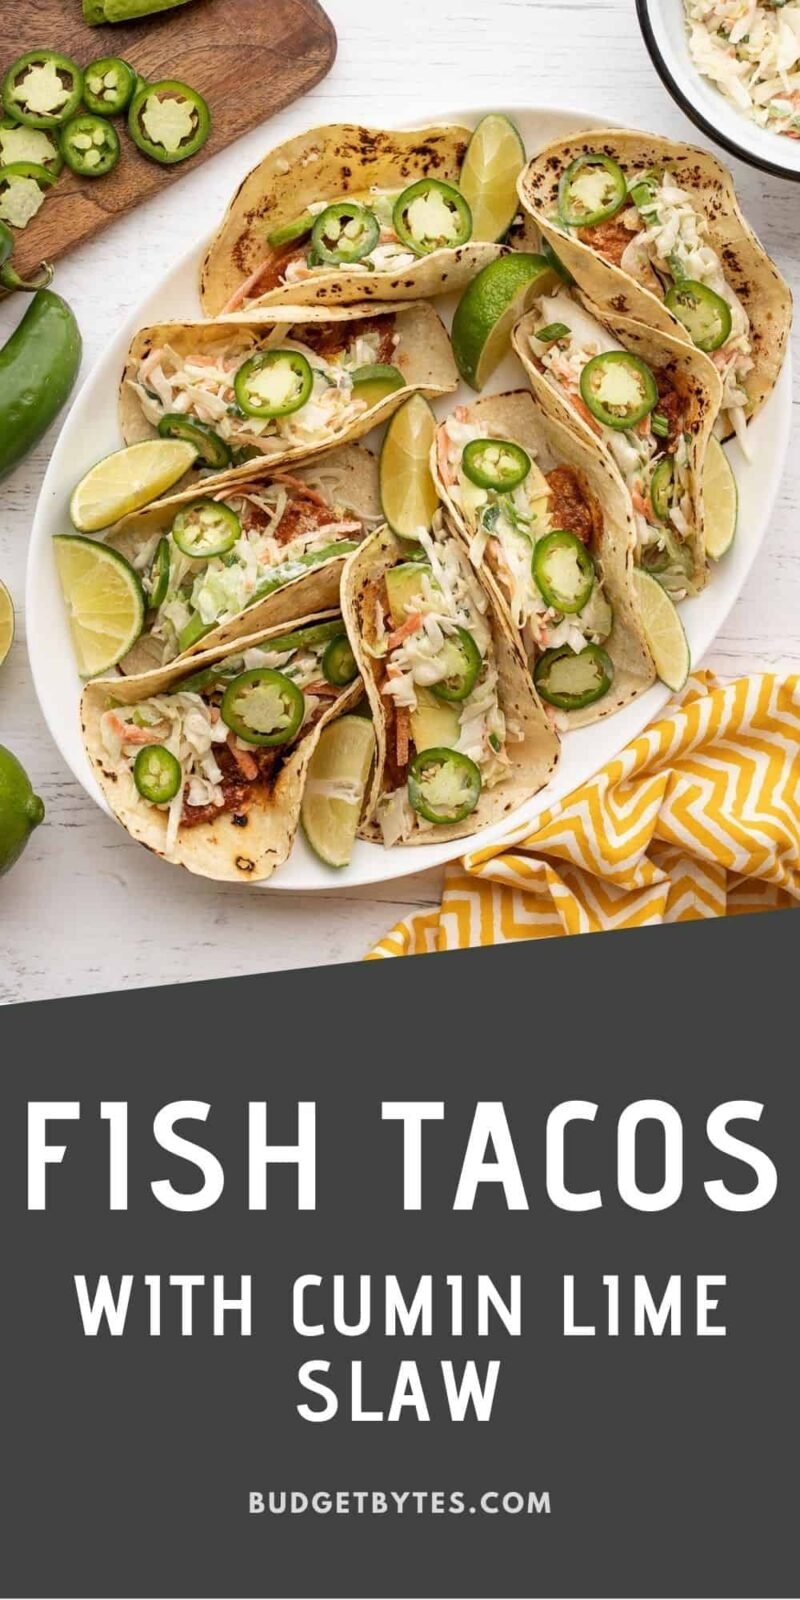 Fish tacos on an oval platter, title text at the bottom